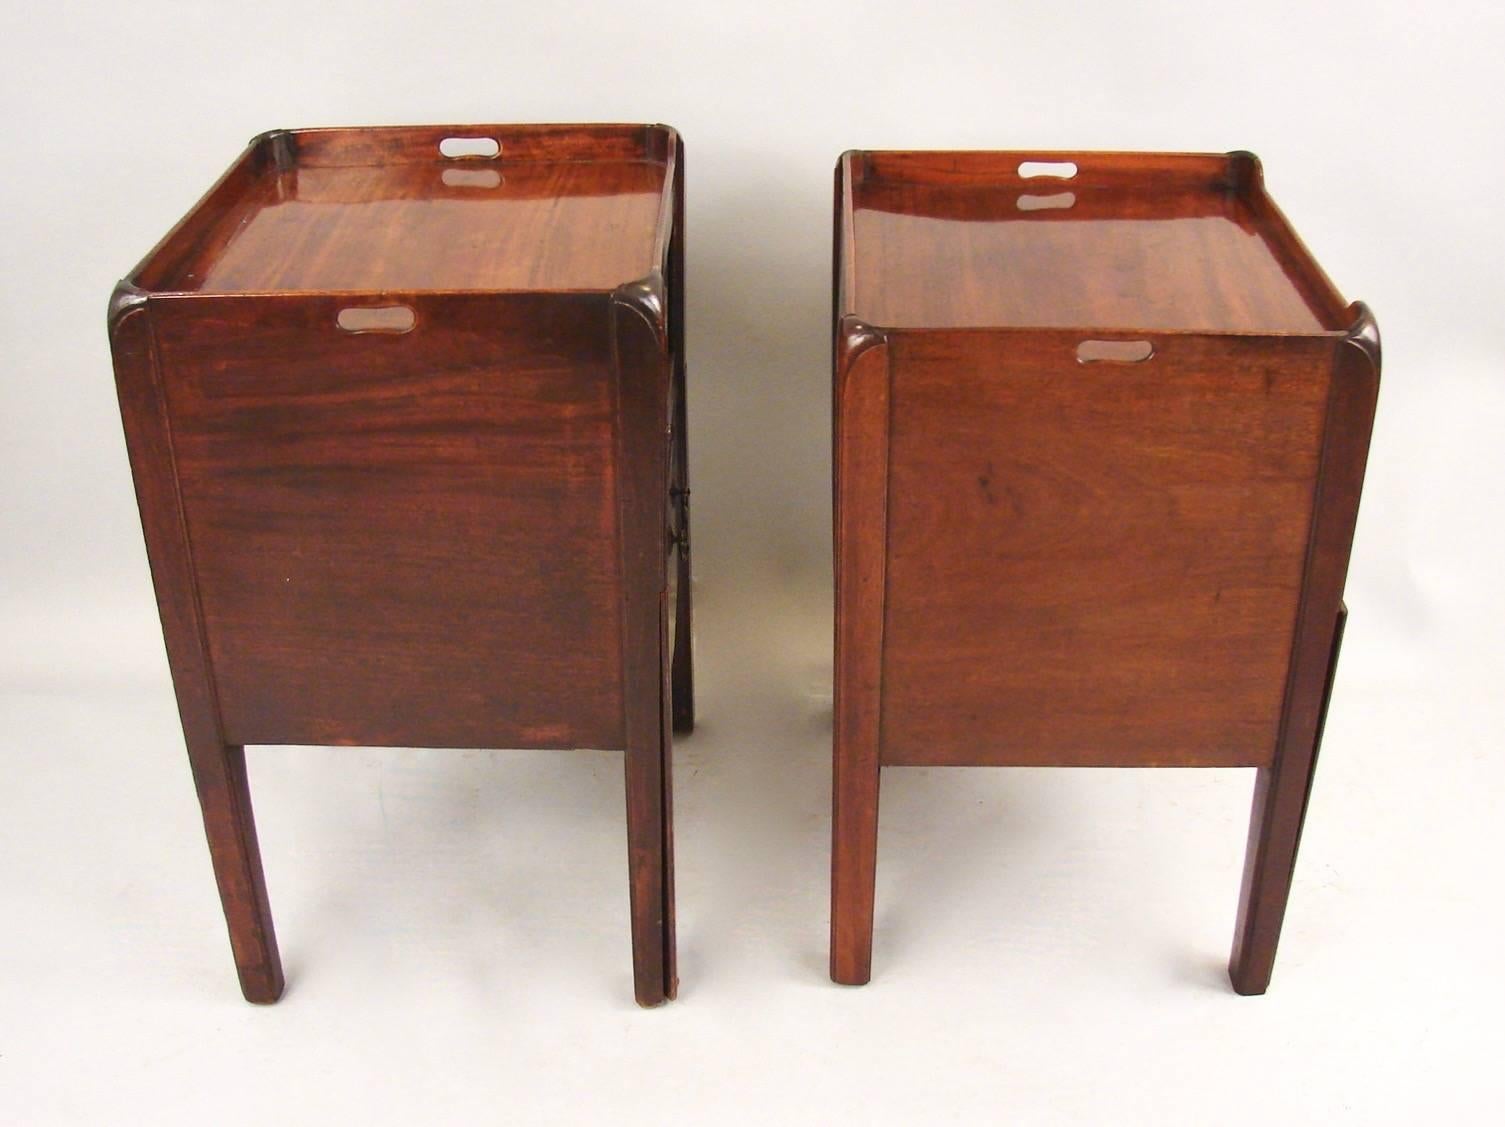 Matched Pair of Georgian Mahogany Bedside Commodes 1